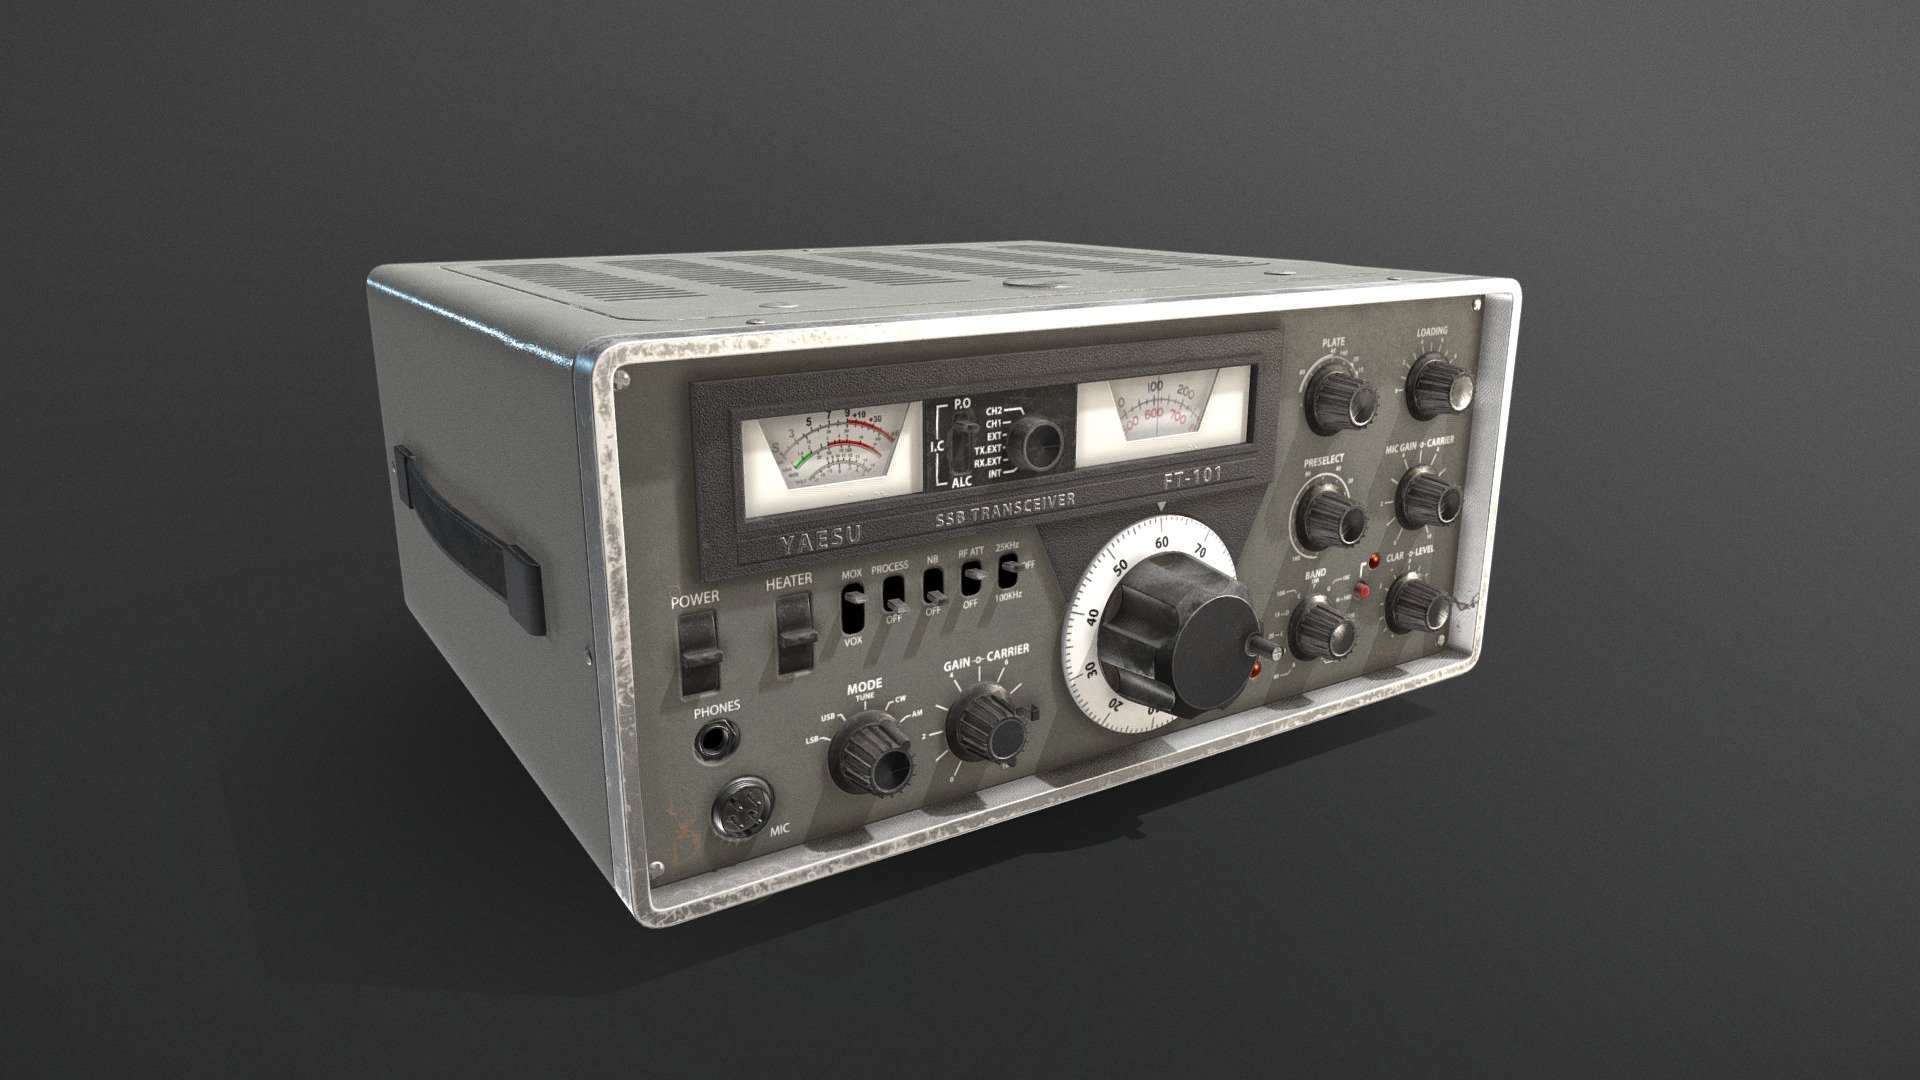 PBR game-ready 3D model of a ham radio (amateur radio) based on the Yaesu FT-101.

The Yaesu FT-101 would be categorized as a vintage or classic amateur radio transceiver. It belongs to an earlier era of radio equipment, as it was first introduced in the late 1970s.

This is a realistic model built to scale and careful reference look-up.

Textures are packed and ready for Unreal Engine, Unity. It also comes with unpacked textures, so it can be used in any other game engine or renderer. Textures are created in Substance Painter.

25842 Polygons - 26538 Vertices. One texture sheet at 4096x4096px 3d model